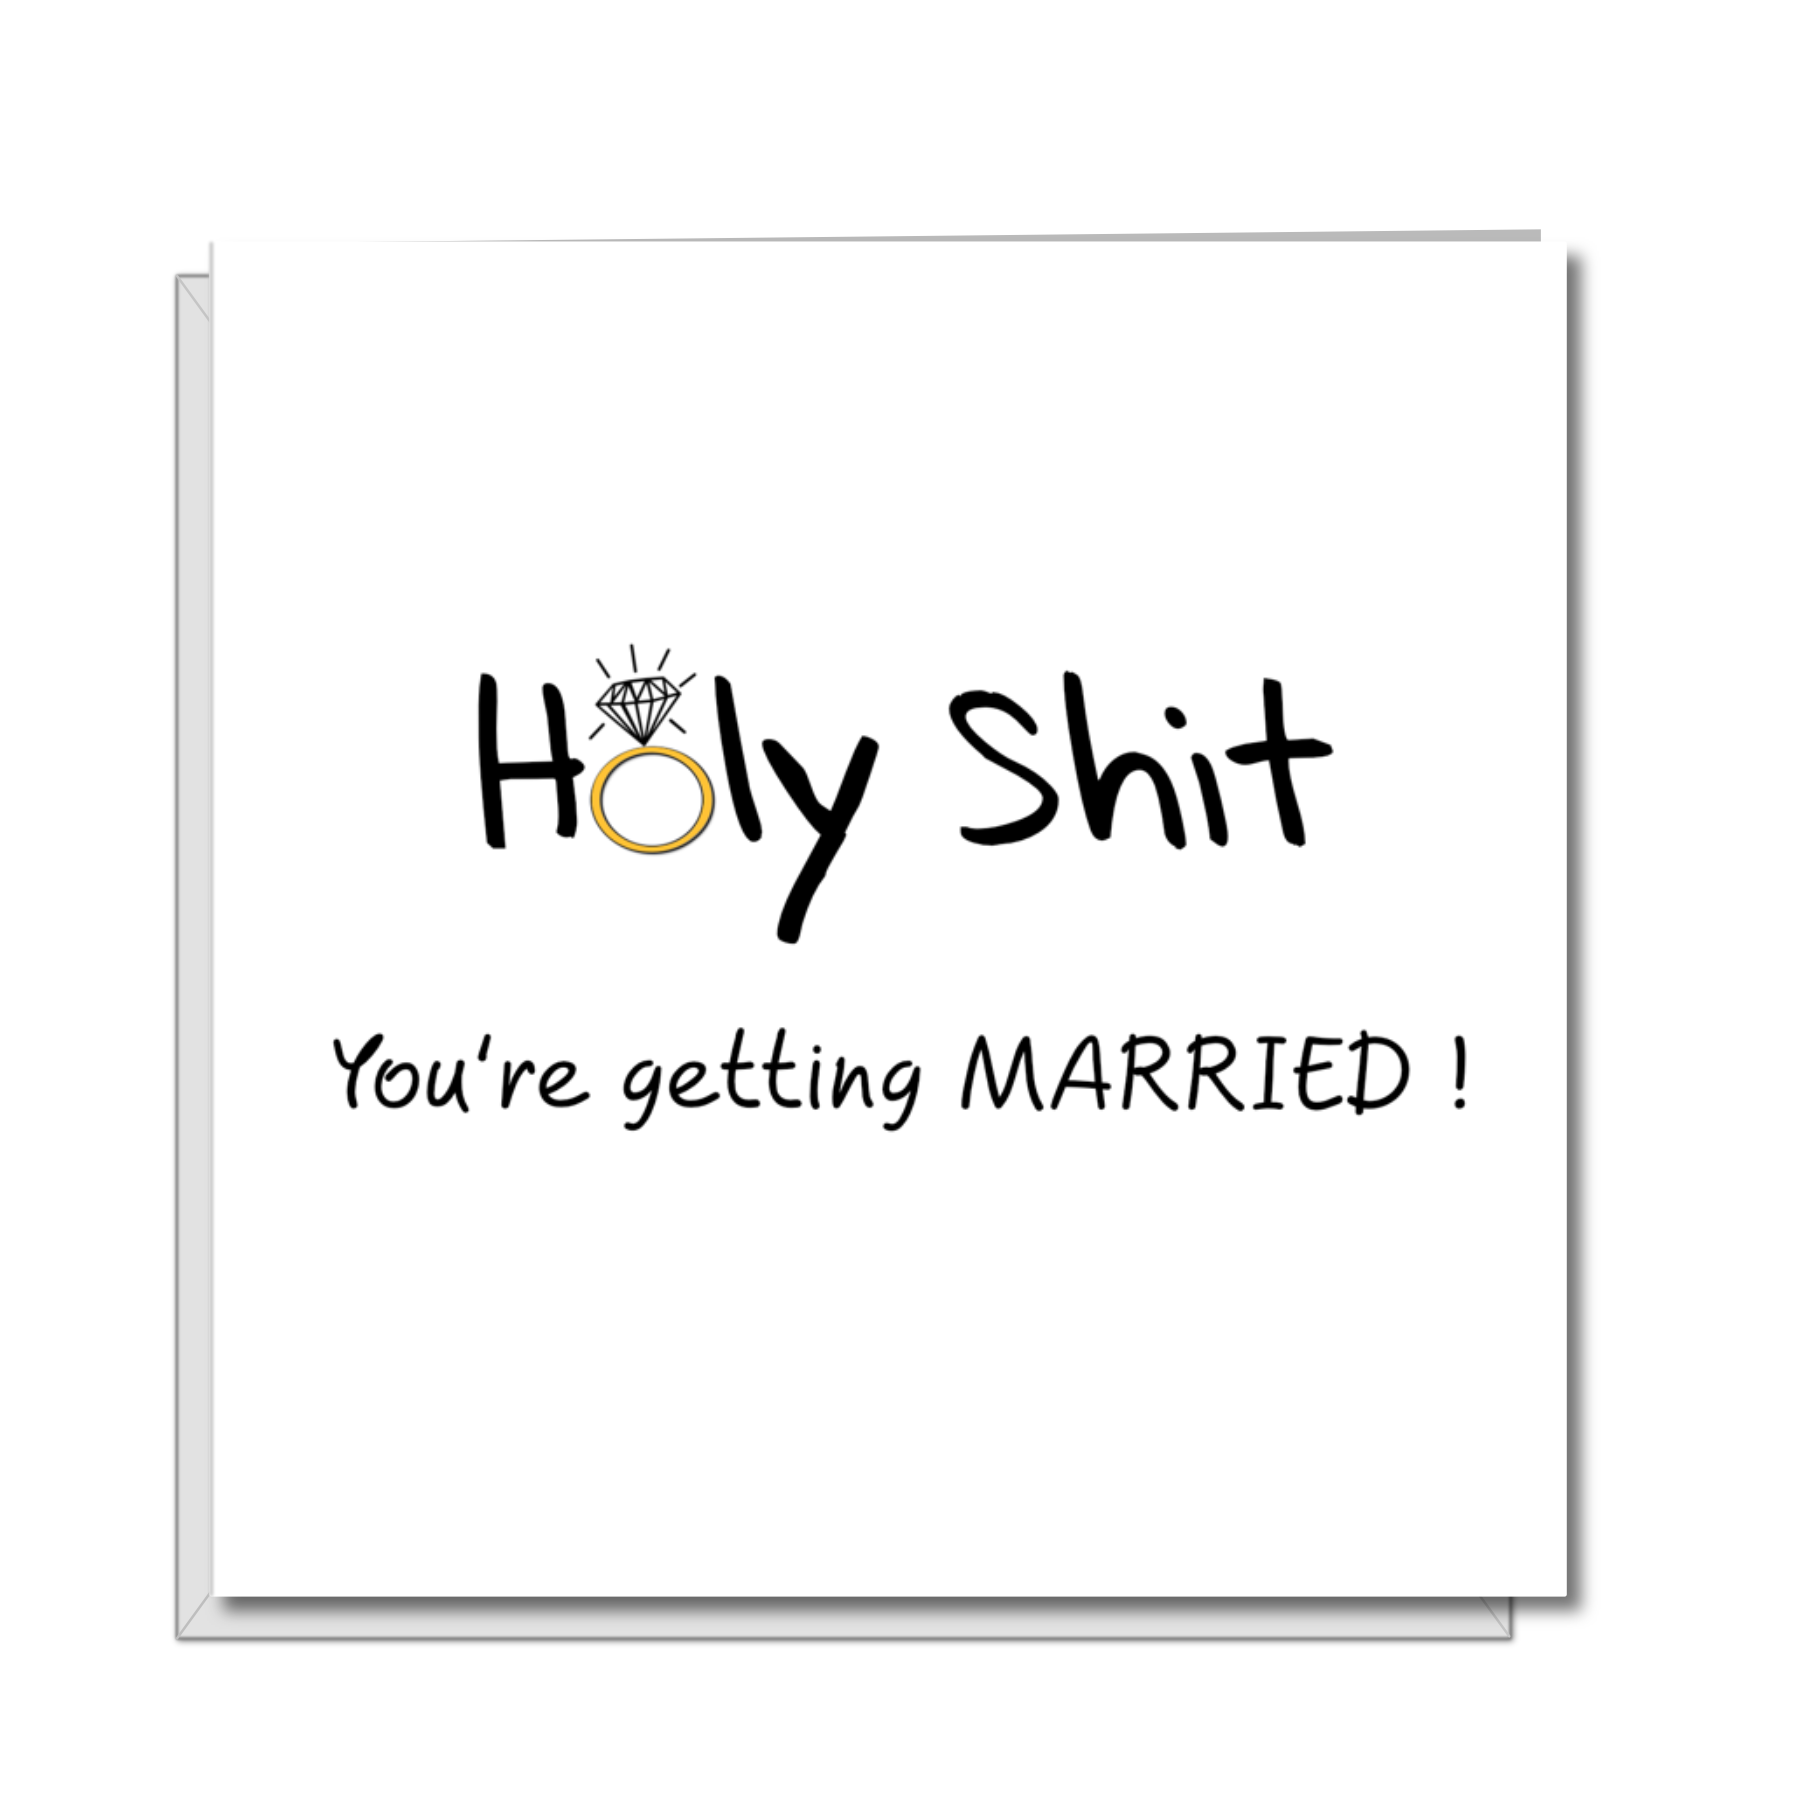 Congratulations Getting Married card -  Holy Shit Engagement for bride or groom - Funny Humorous  crude